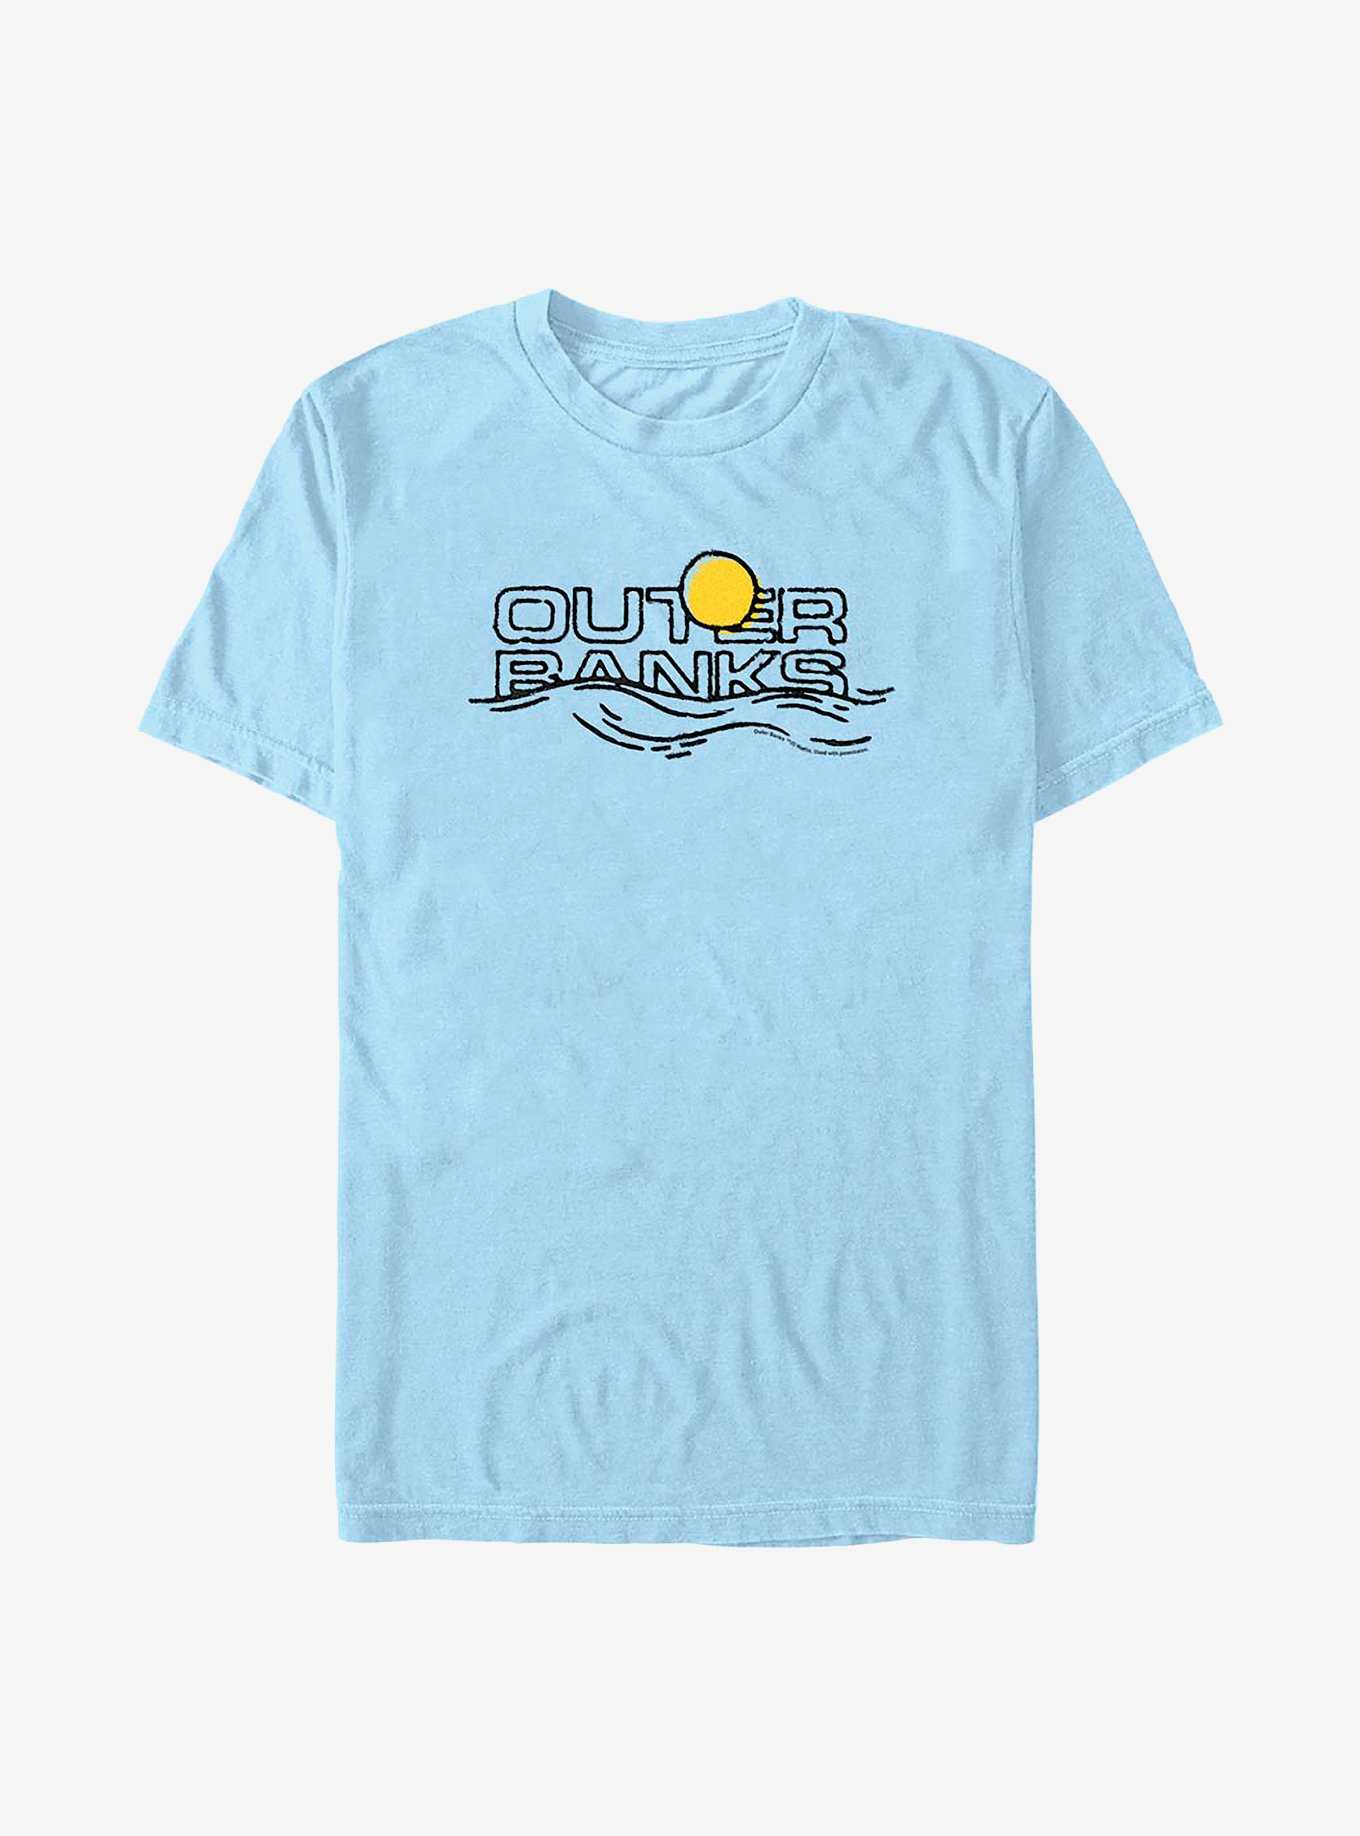 Outer Banks Title On Horizon T-Shirt, , hi-res